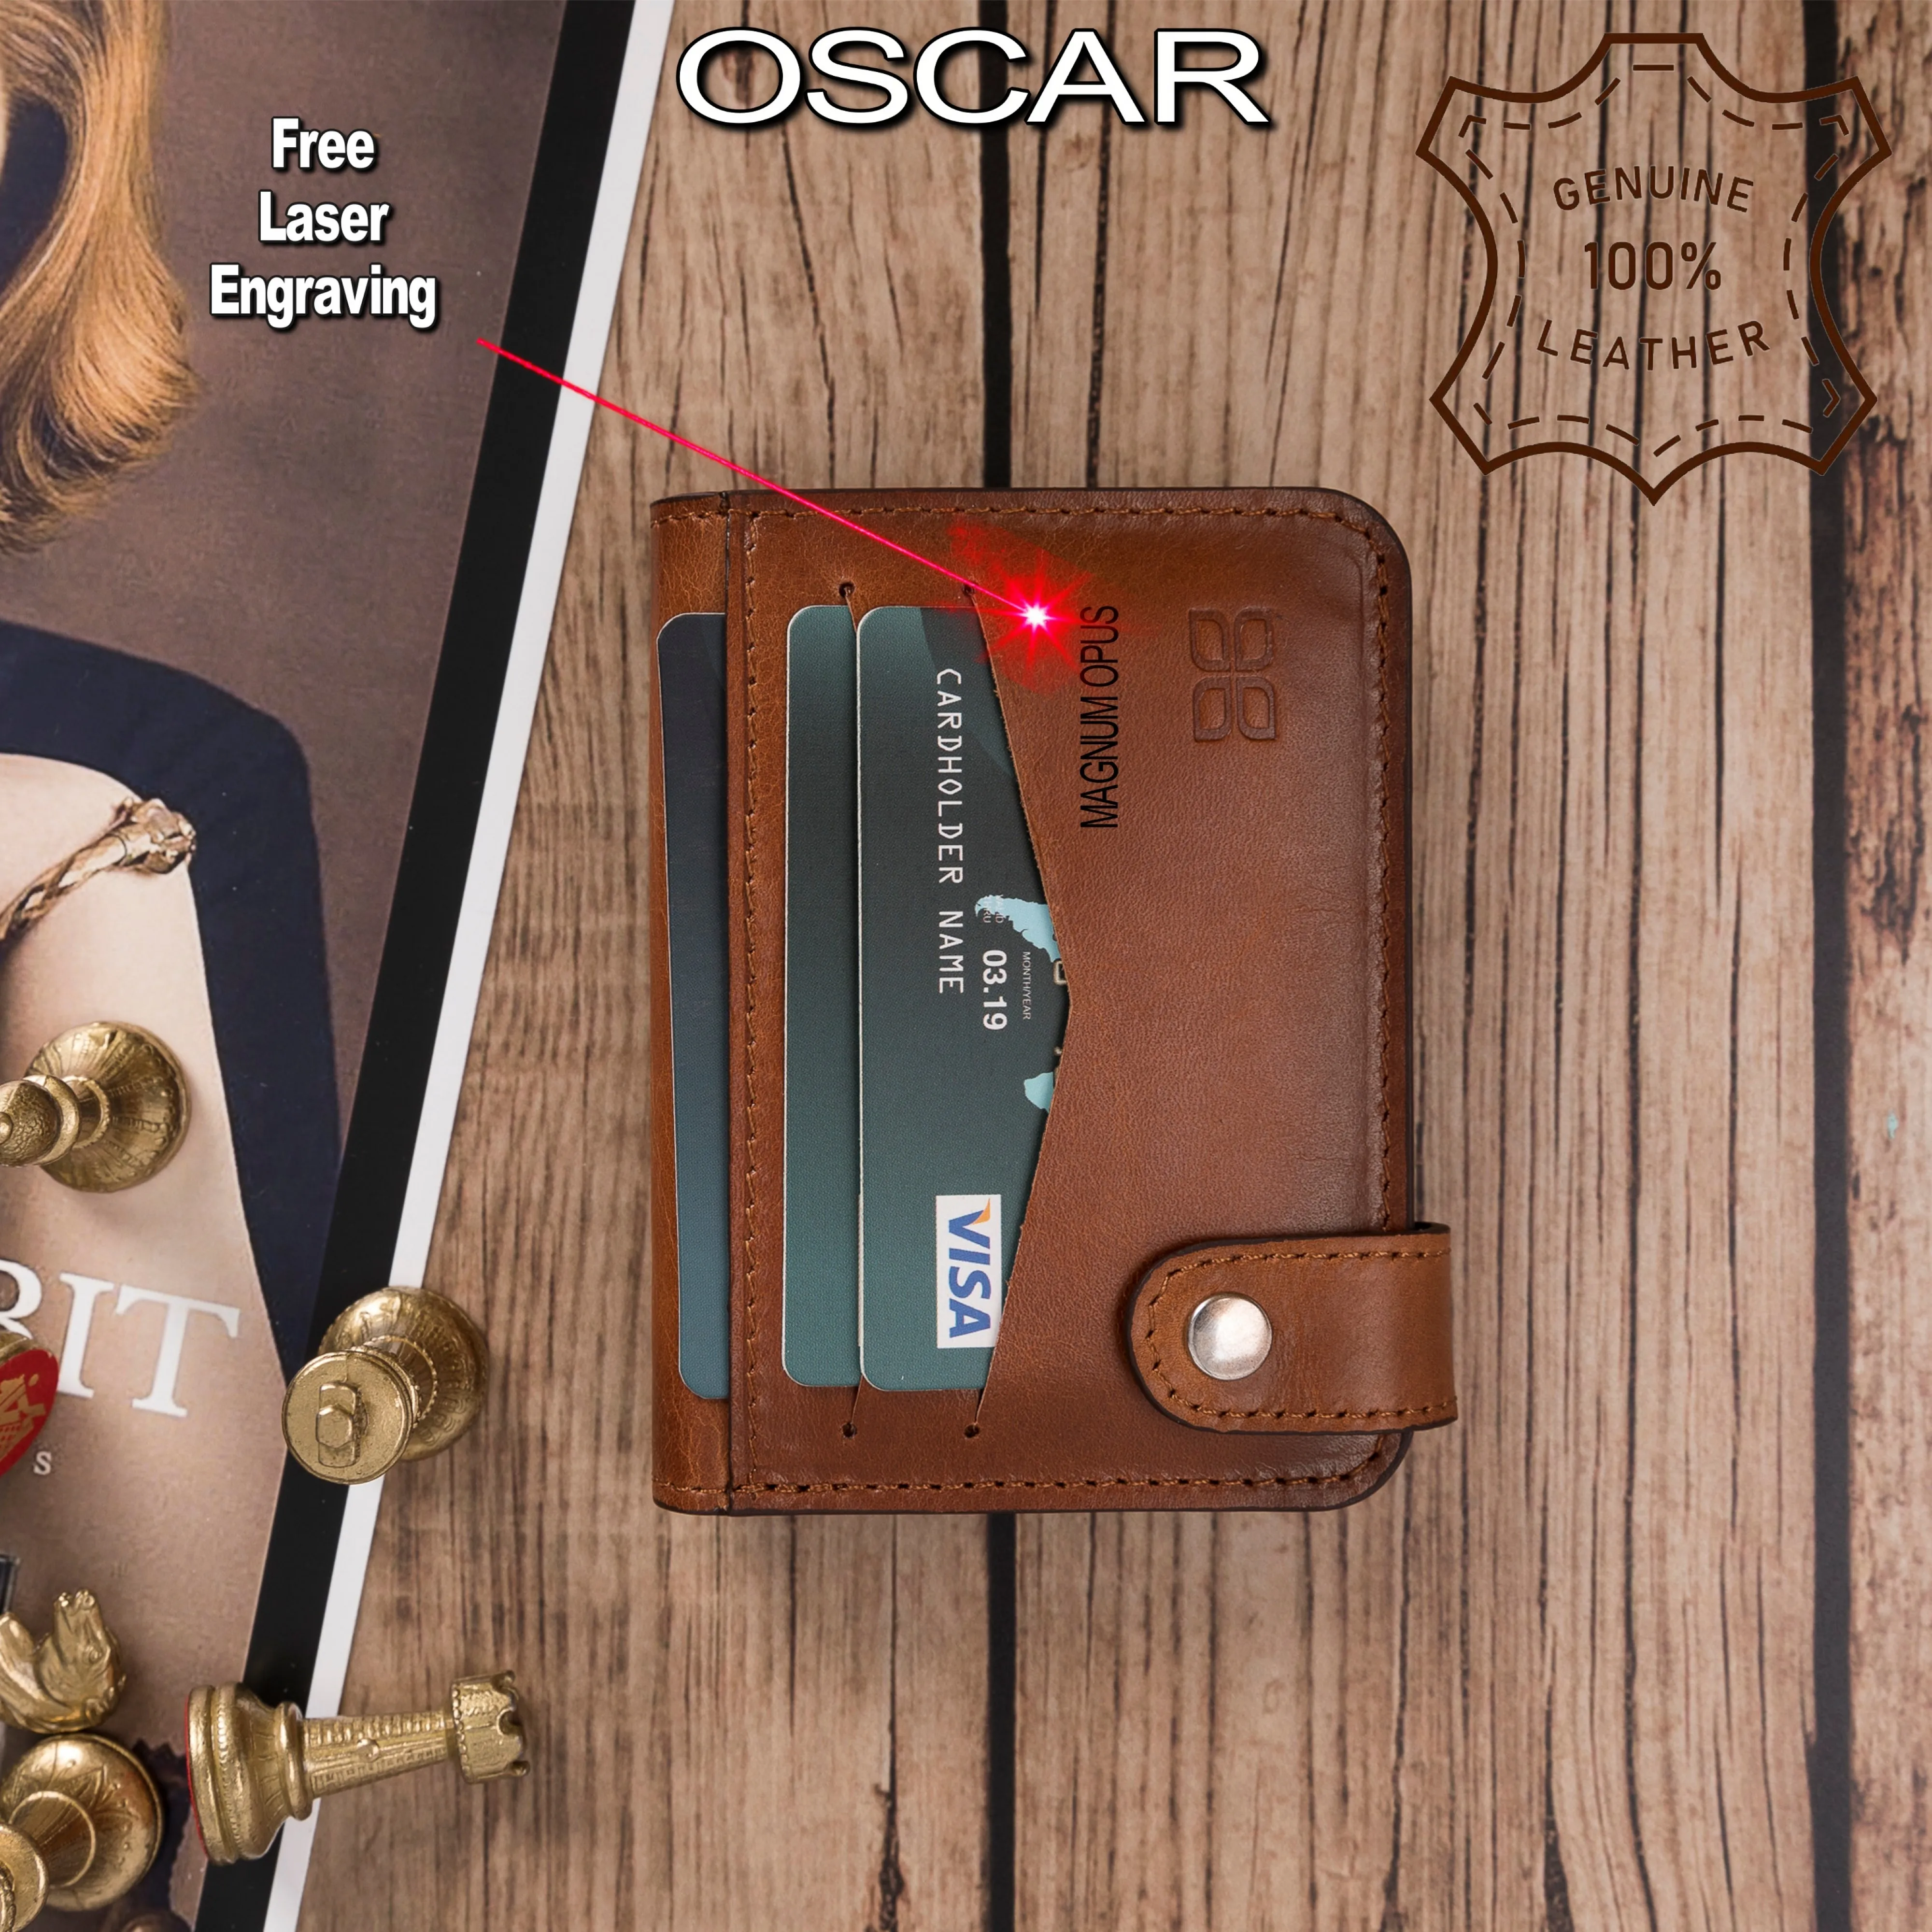 Genuine Leather Handmade Credit Card & ID Card Holder Wallet Stores Up To 17 Cards 1 Main Money Compartment Personalizable